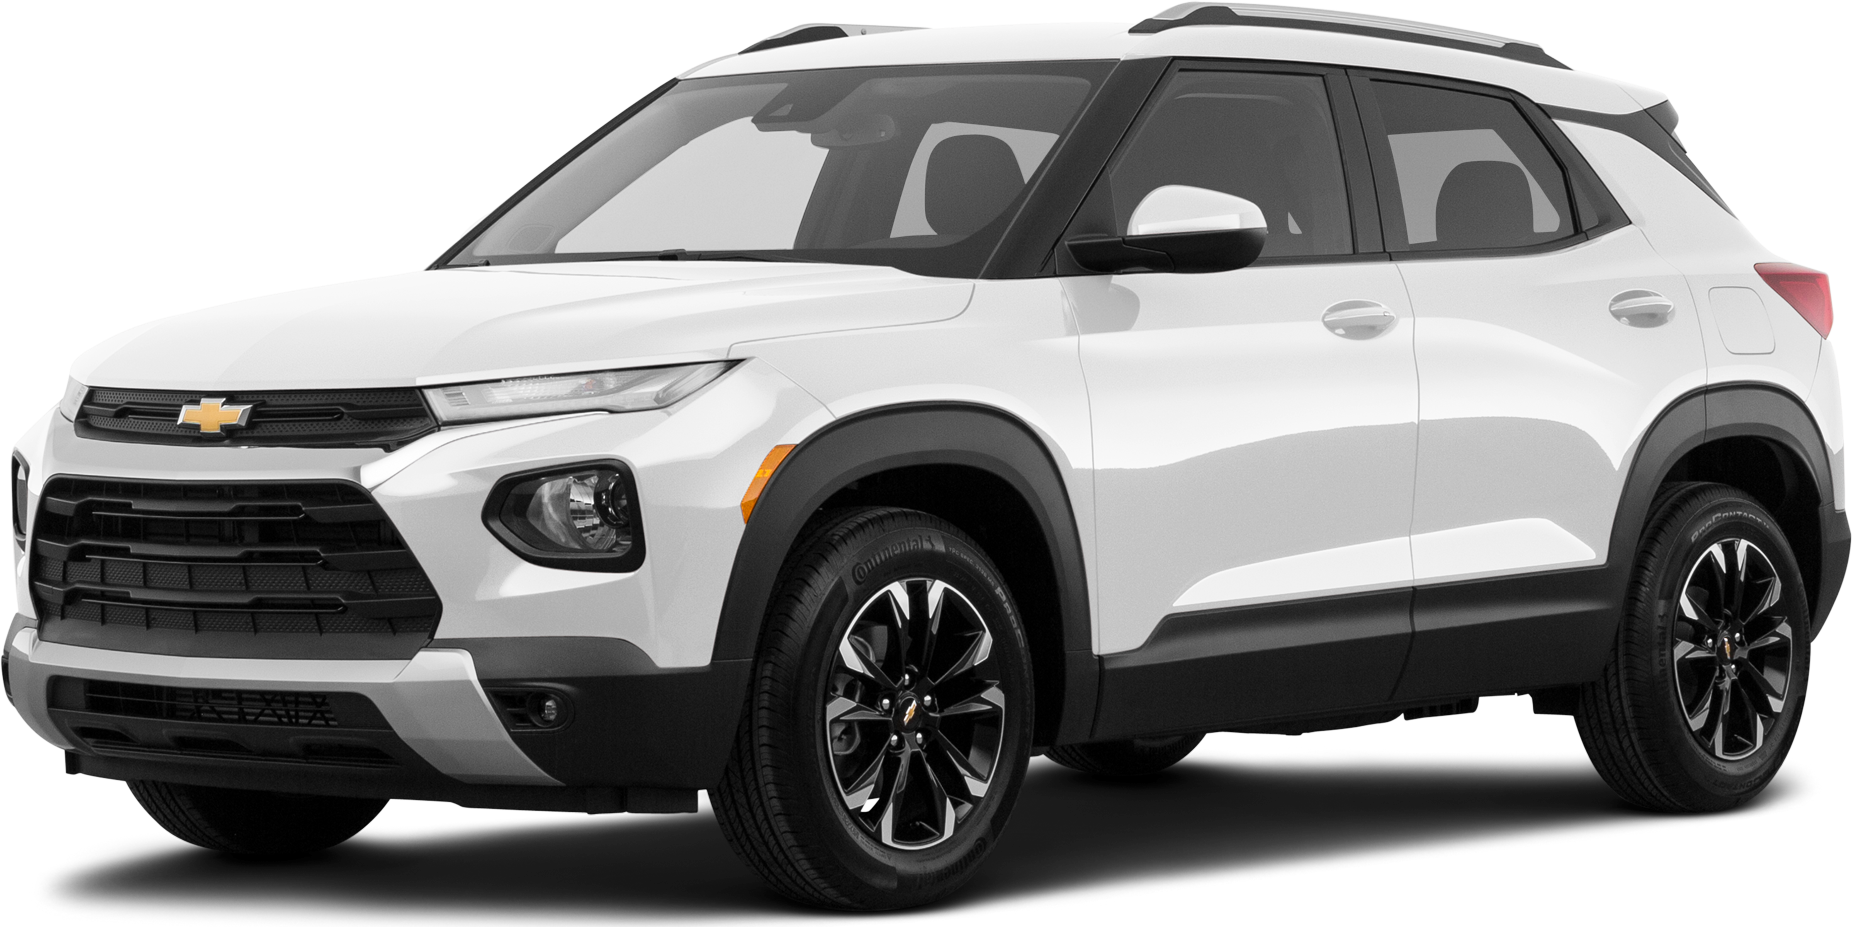 2021 Chevrolet Trailblazer Price Value Ratings And Reviews Kelley